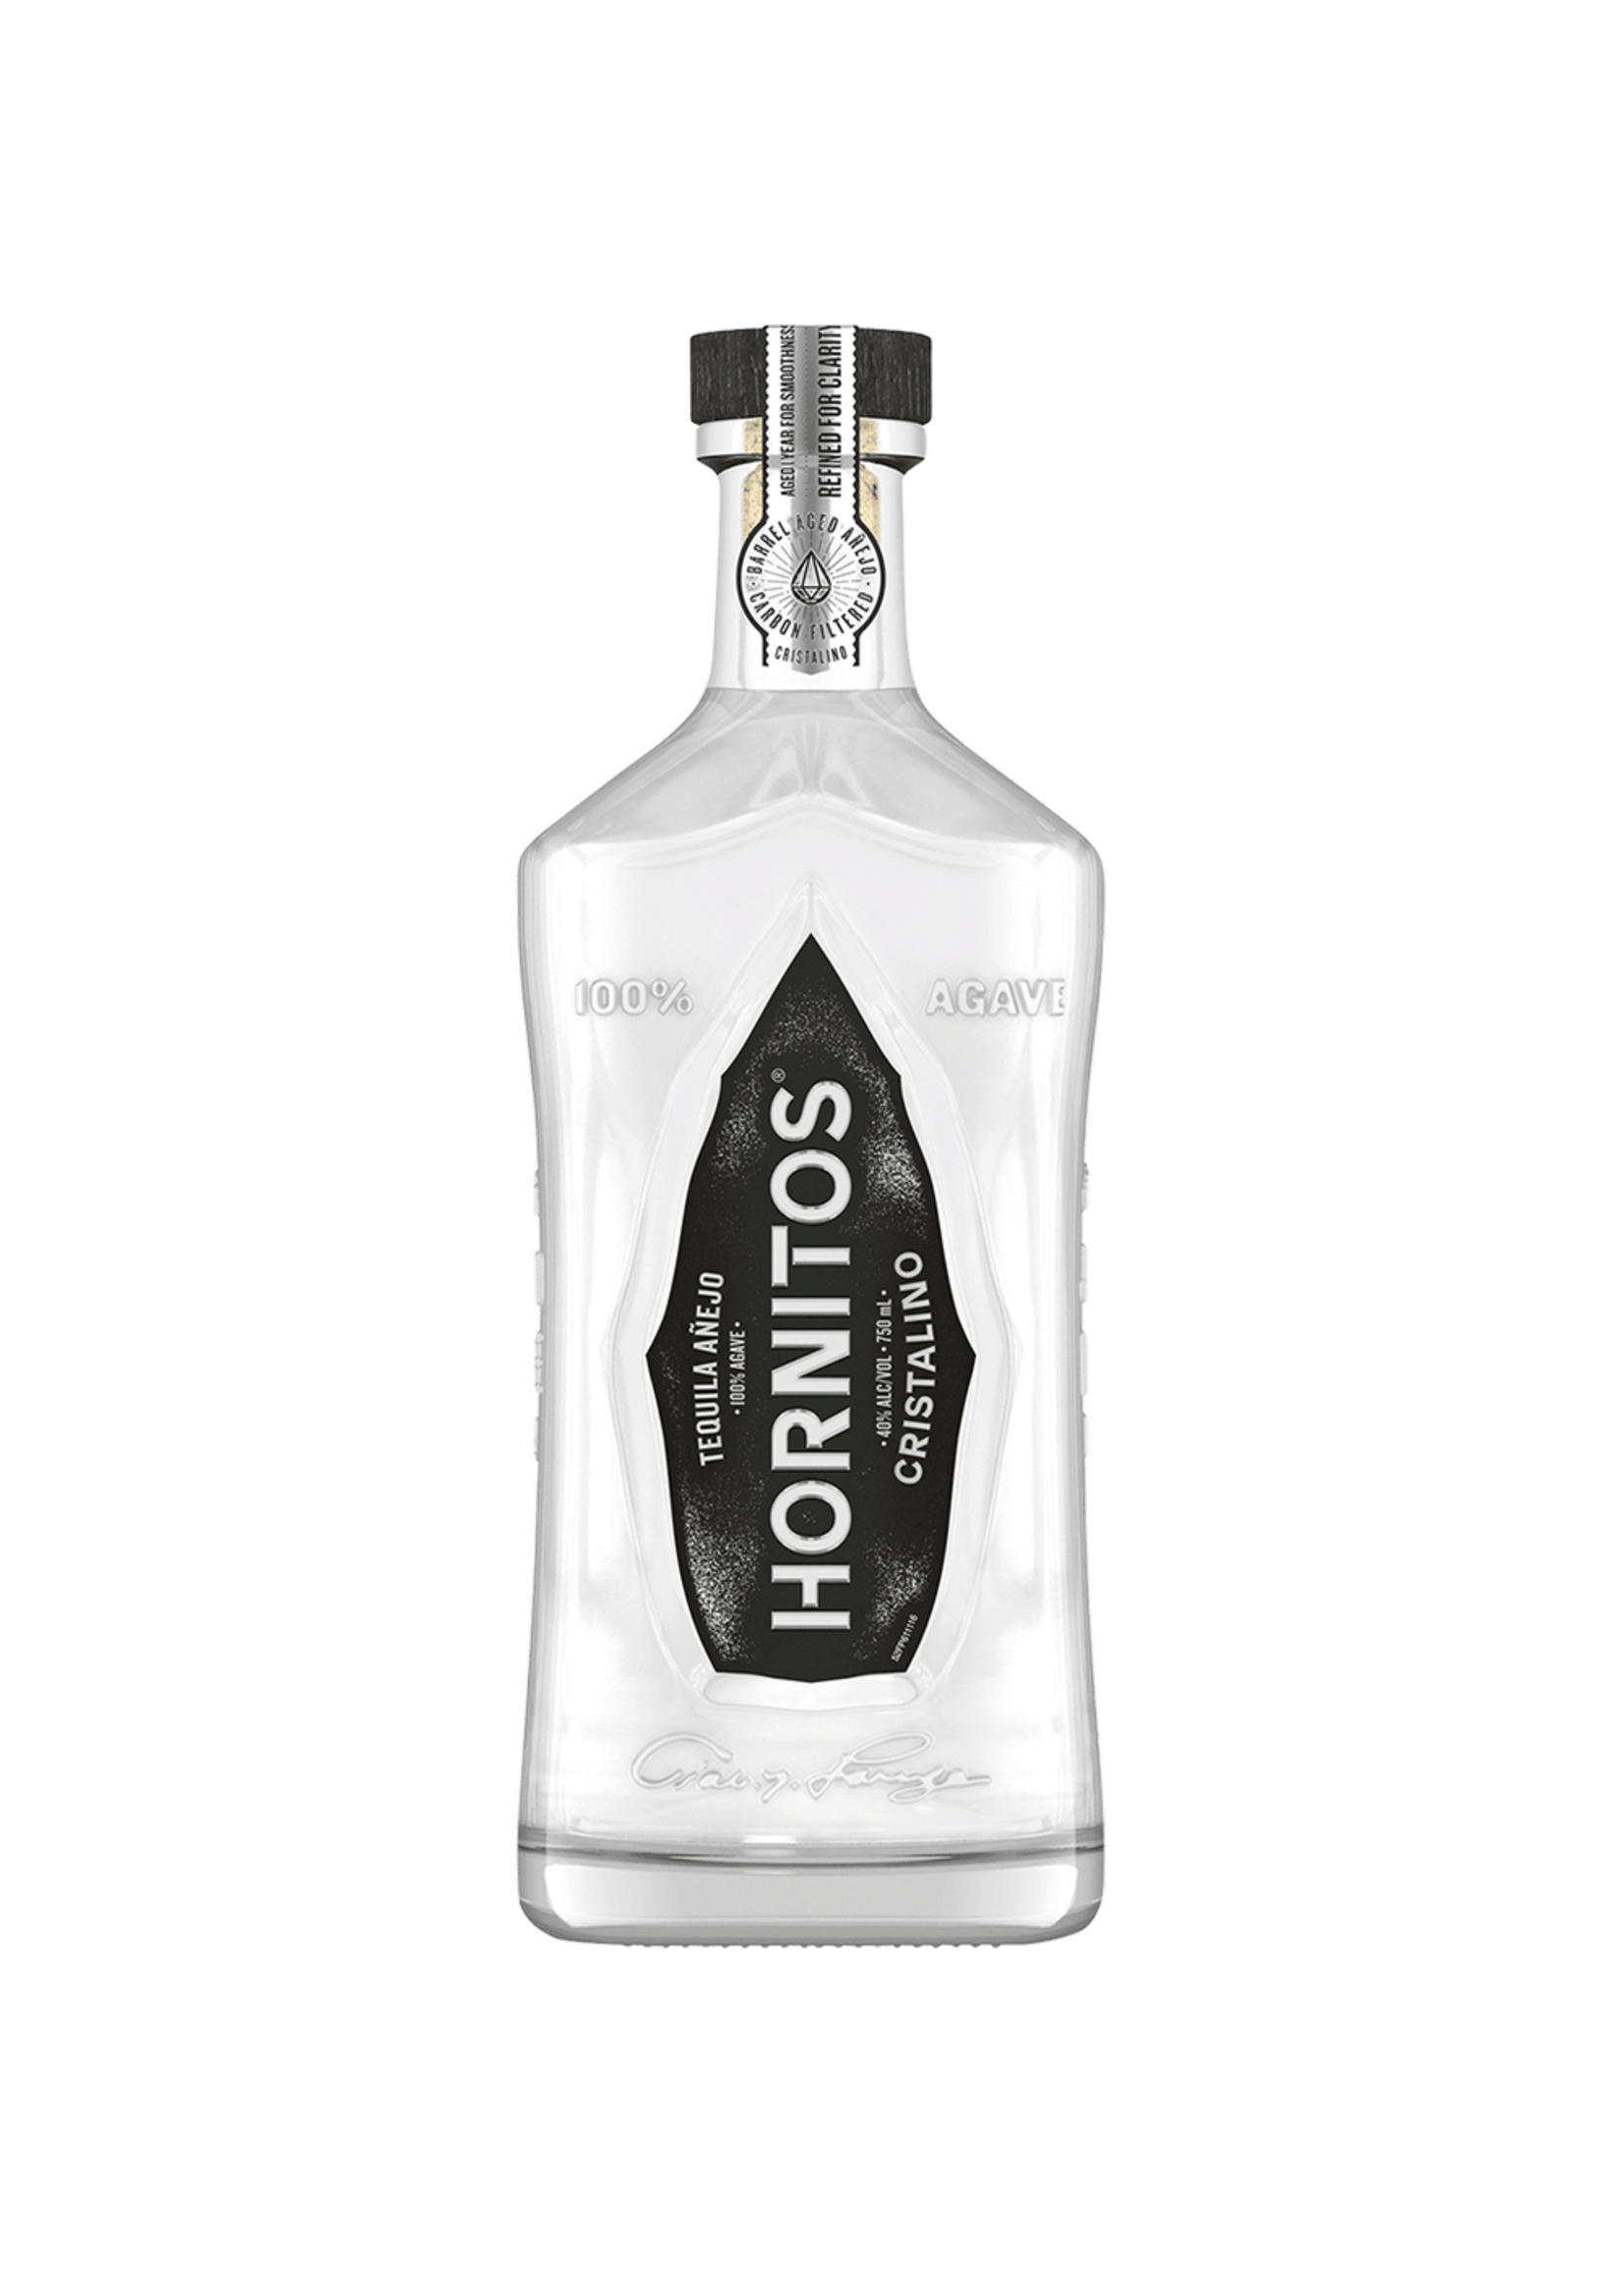 Hornitos Tequila Hornitos Anejo Cristalino Tequila 80Proof 750ml